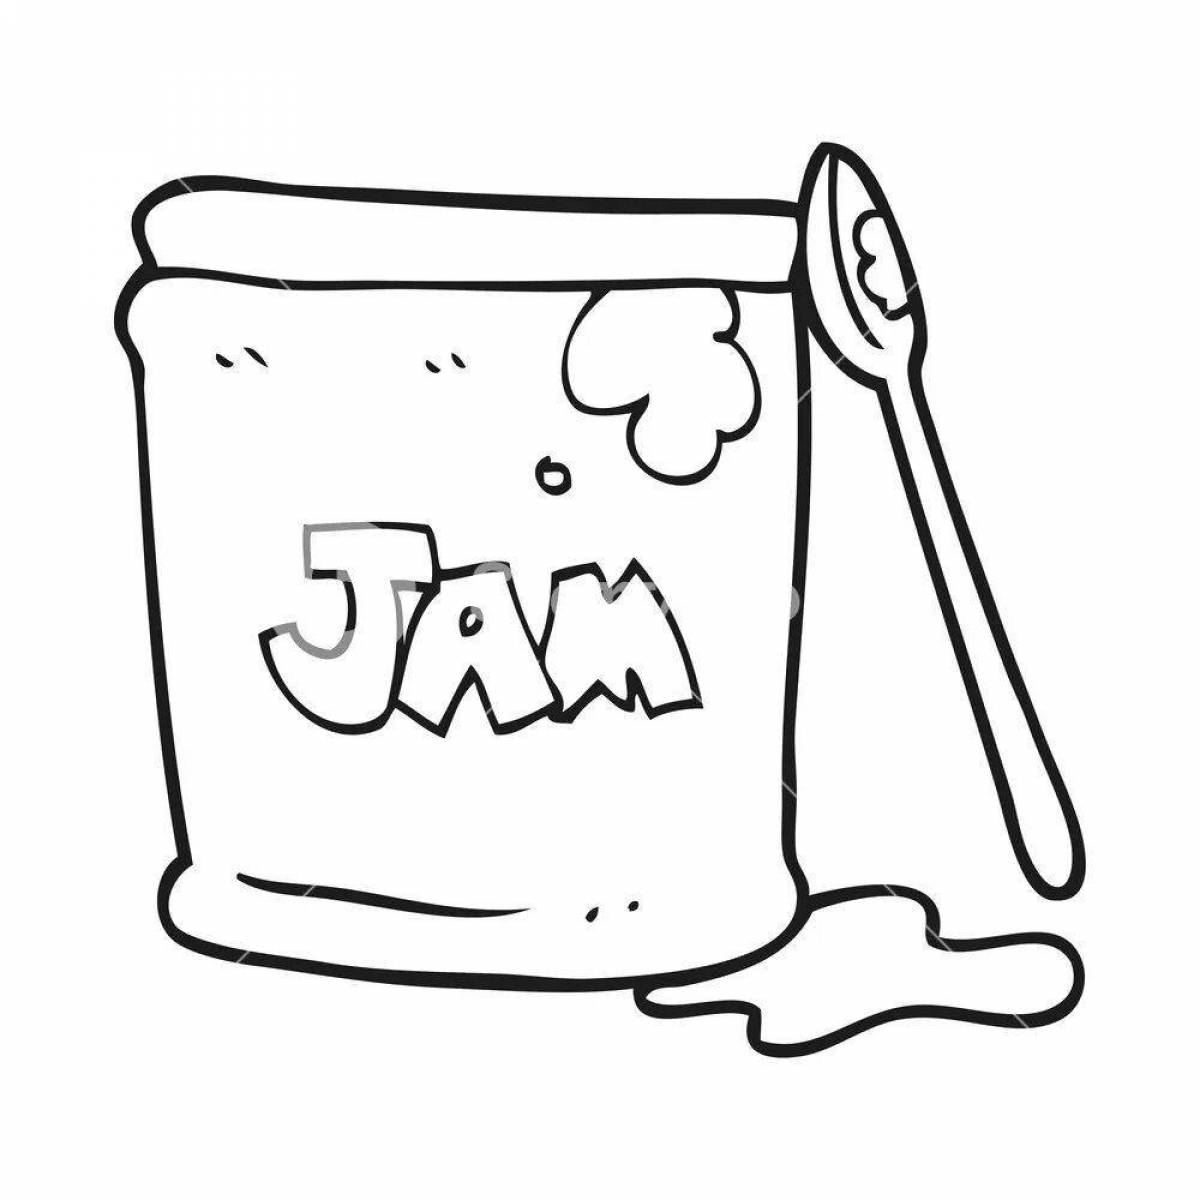 Crazy Jam Coloring Page